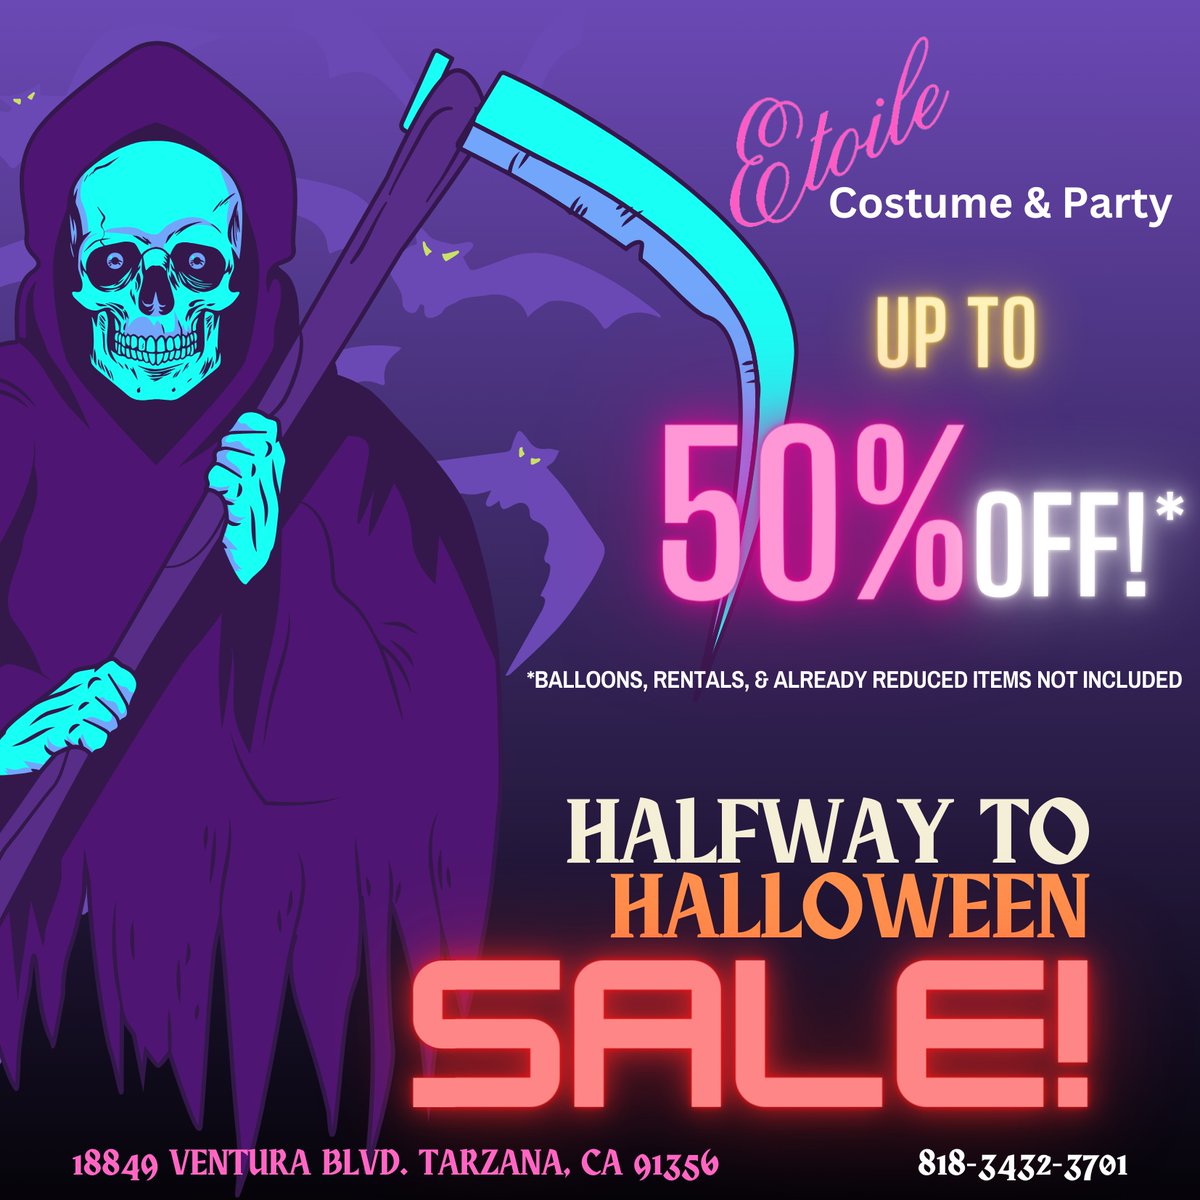 Half-o-ween SALE!! 
Celebrate halfway to Halloween with a store wide sale! 
Take up to 50% off store retail inventory!
Costumes. Accessories. Wigs. Make Up. Gifts. & More!
Sale ends May 10.

#Sale #StoreSale #HalfwayToHalloween #Halloween #HalloweenSale
#Costumes #Accessories ...